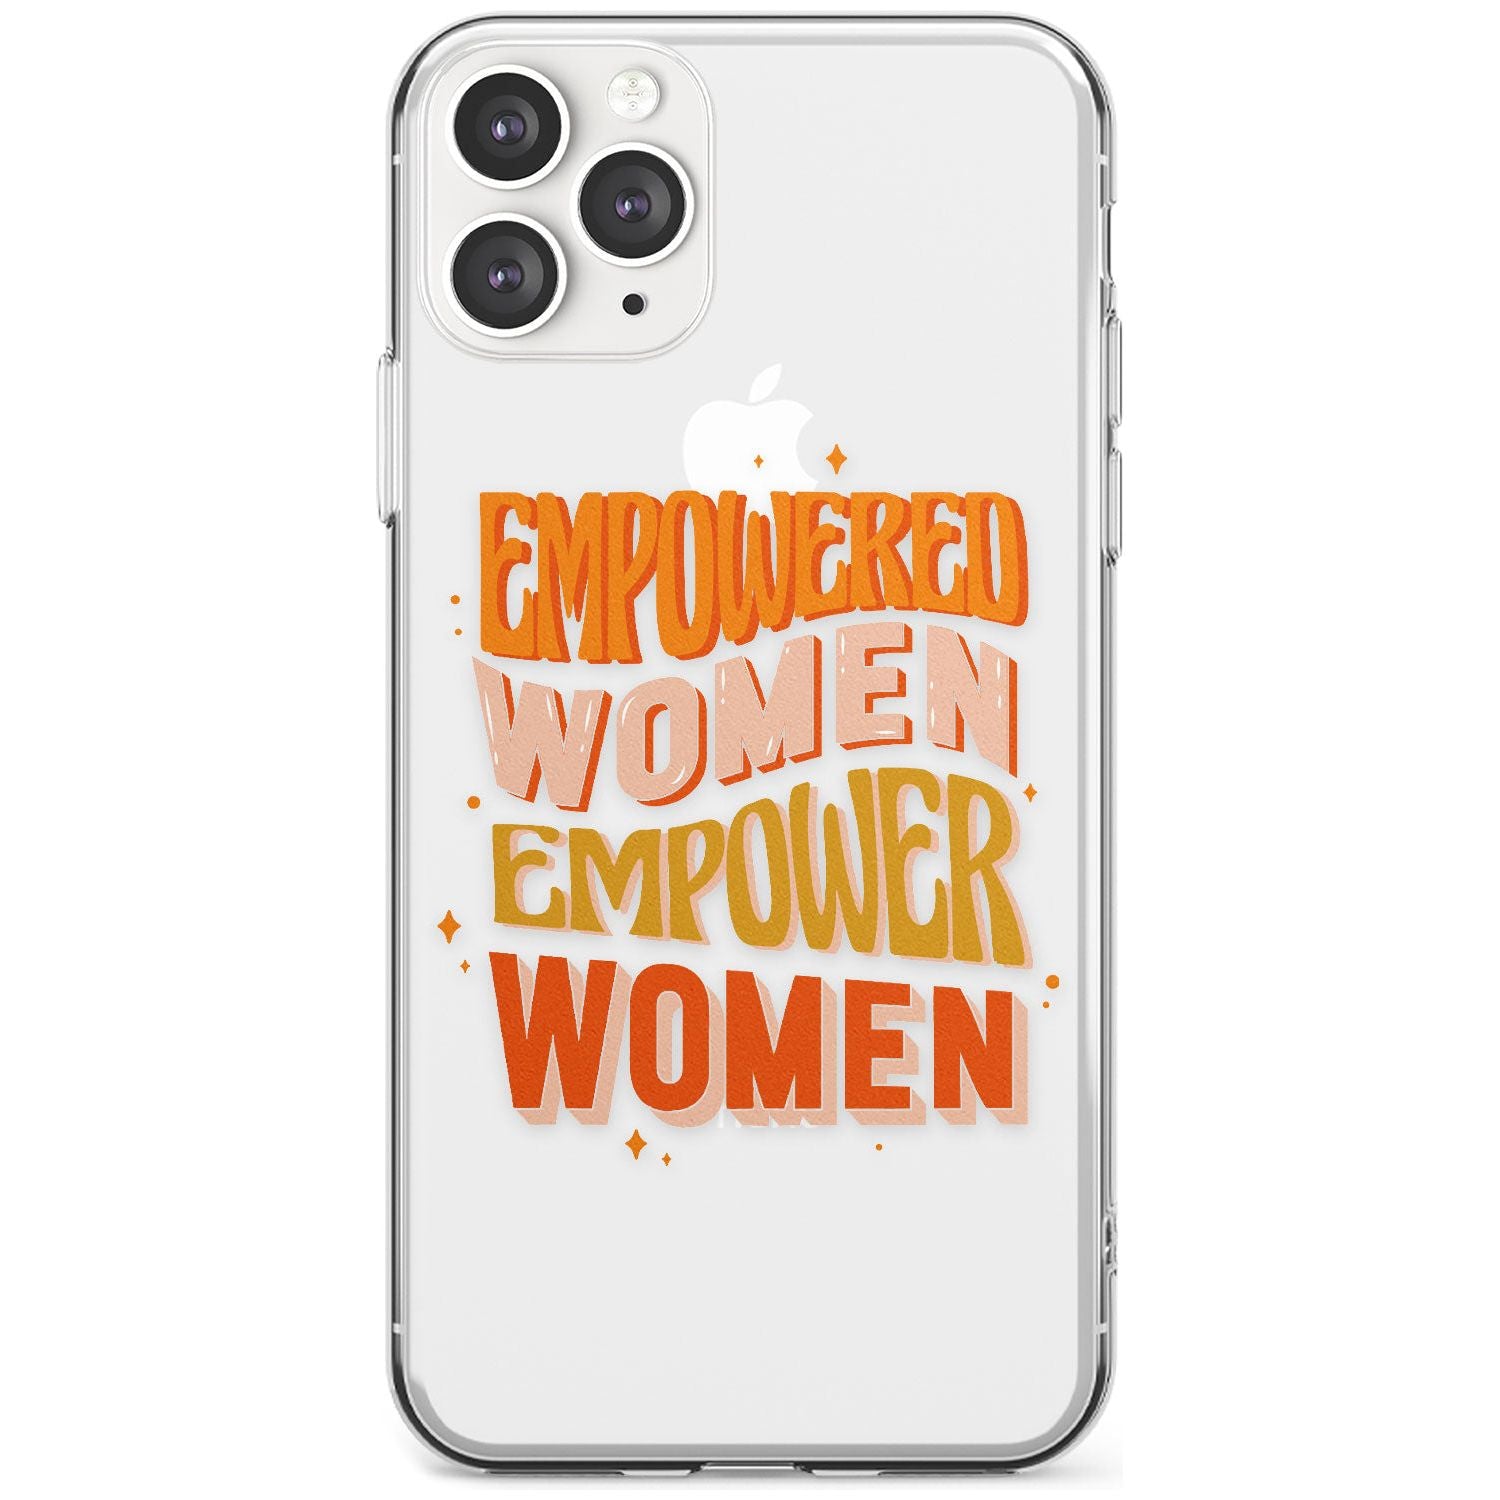 Empowered Women Slim TPU Phone Case for iPhone 11 Pro Max